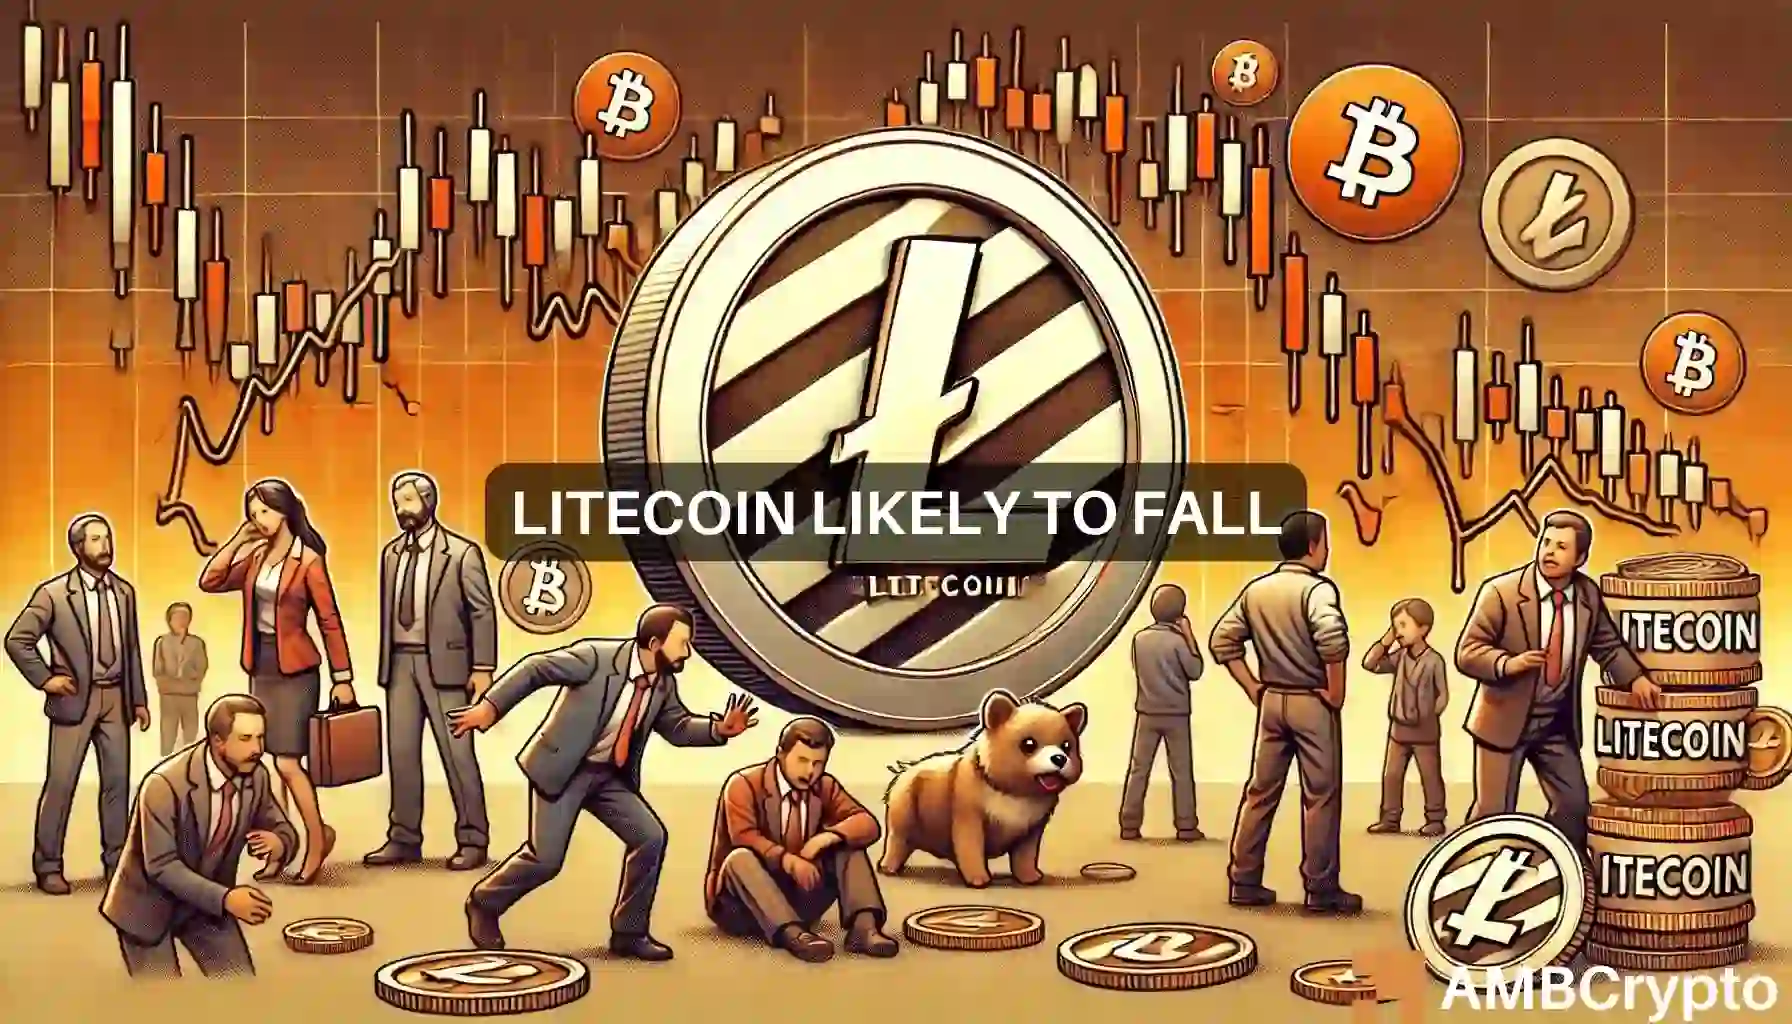 Litecoin holders move to sell 928 million LTC: Will prices drop below $70?